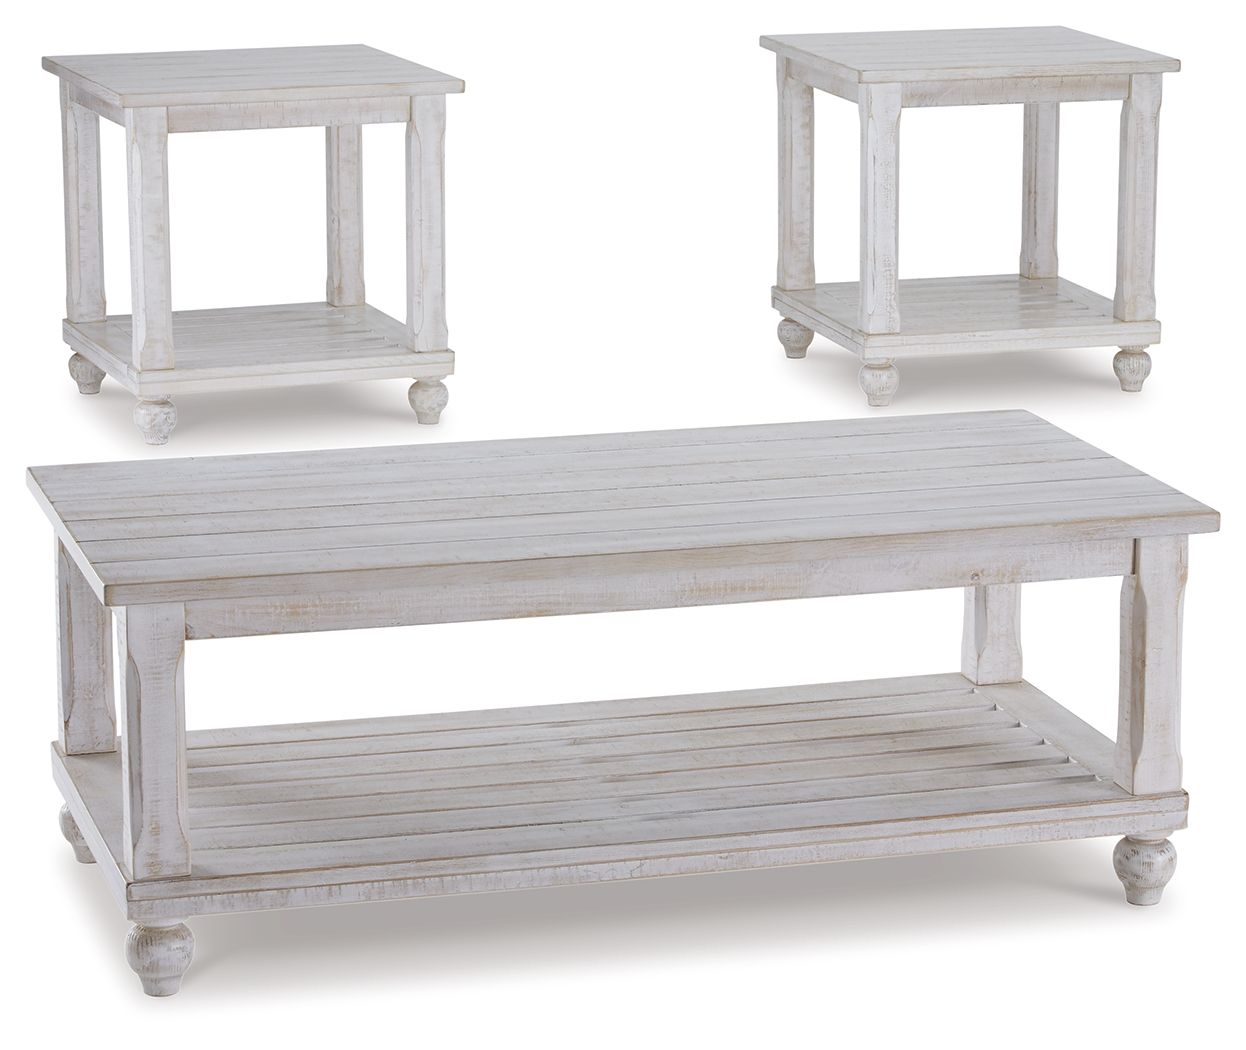 Cloudhurst - White - Occasional Table Set (Set of 3) Tony's Home Furnishings Furniture. Beds. Dressers. Sofas.